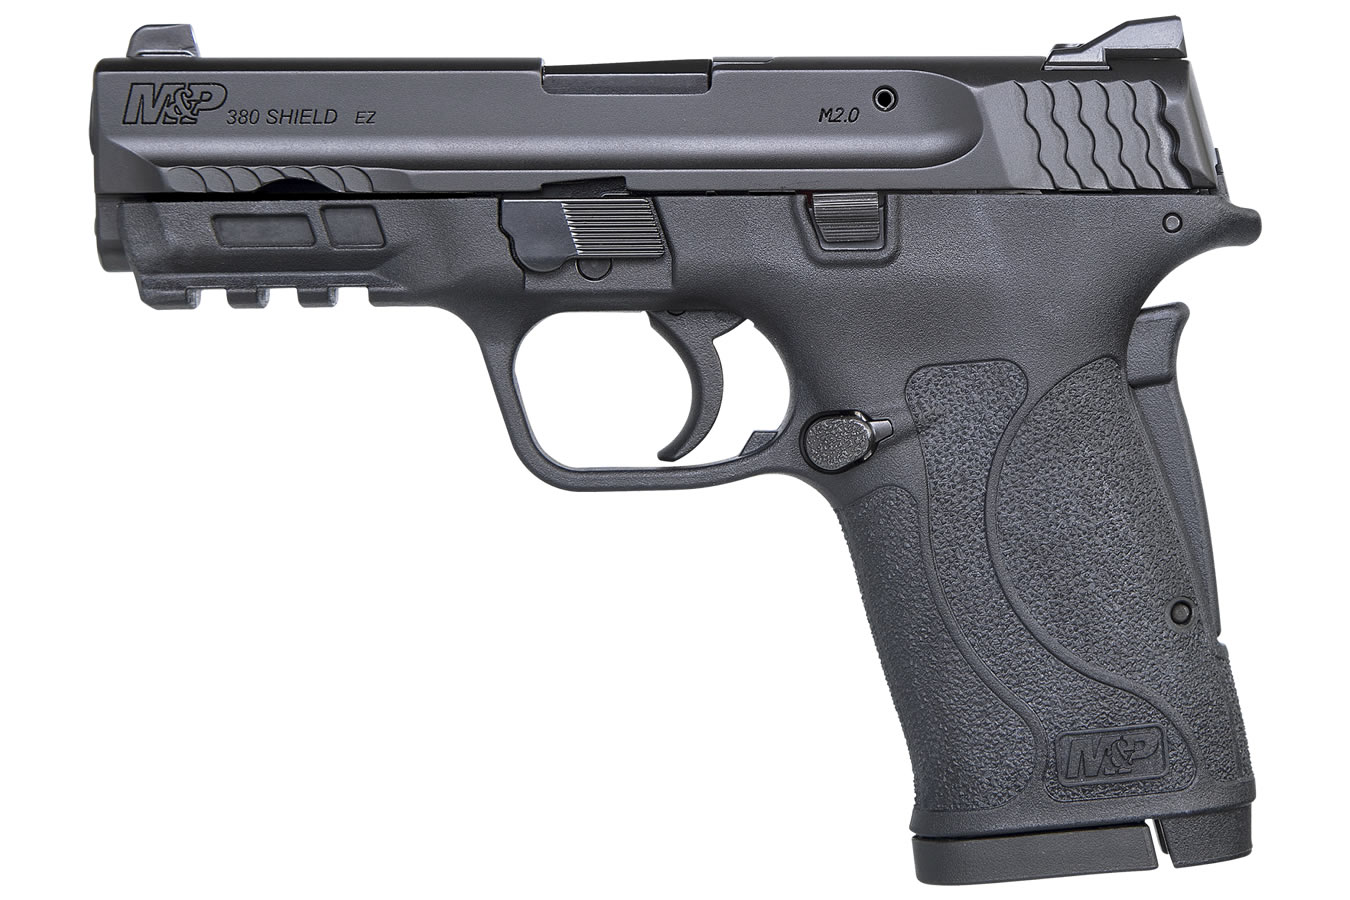 No. 11 Best Selling: SMITH AND WESSON MP380 SHIELD 380 ACP PISTOL W/ NO THUMB SAFETY